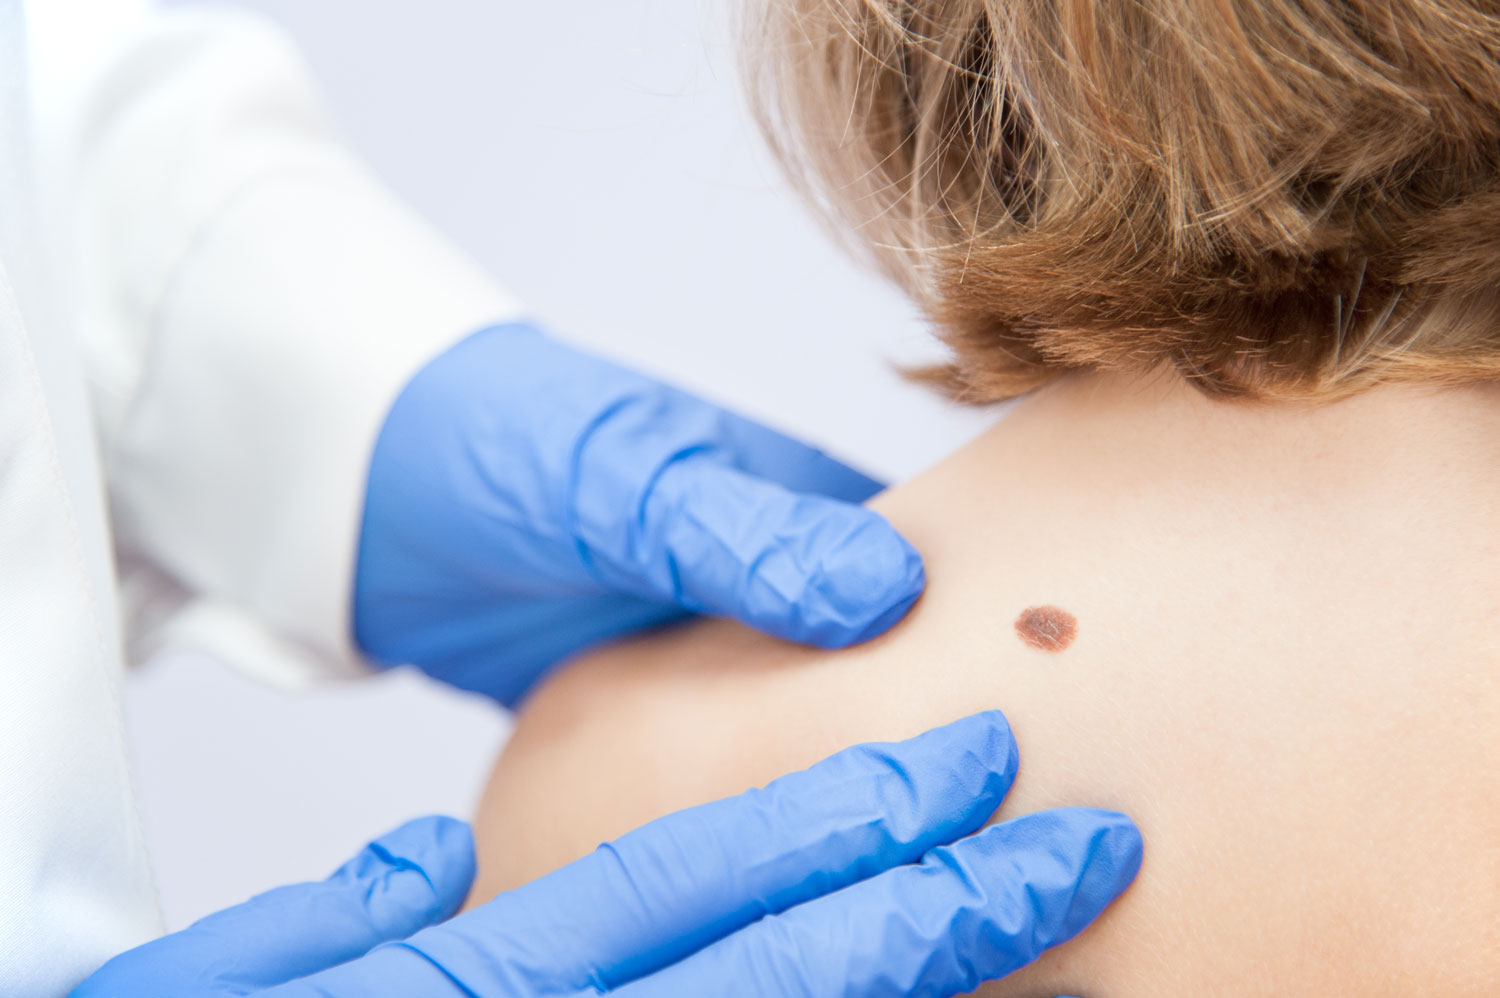 Skin Cancer Early Detection: Signs to Watch For